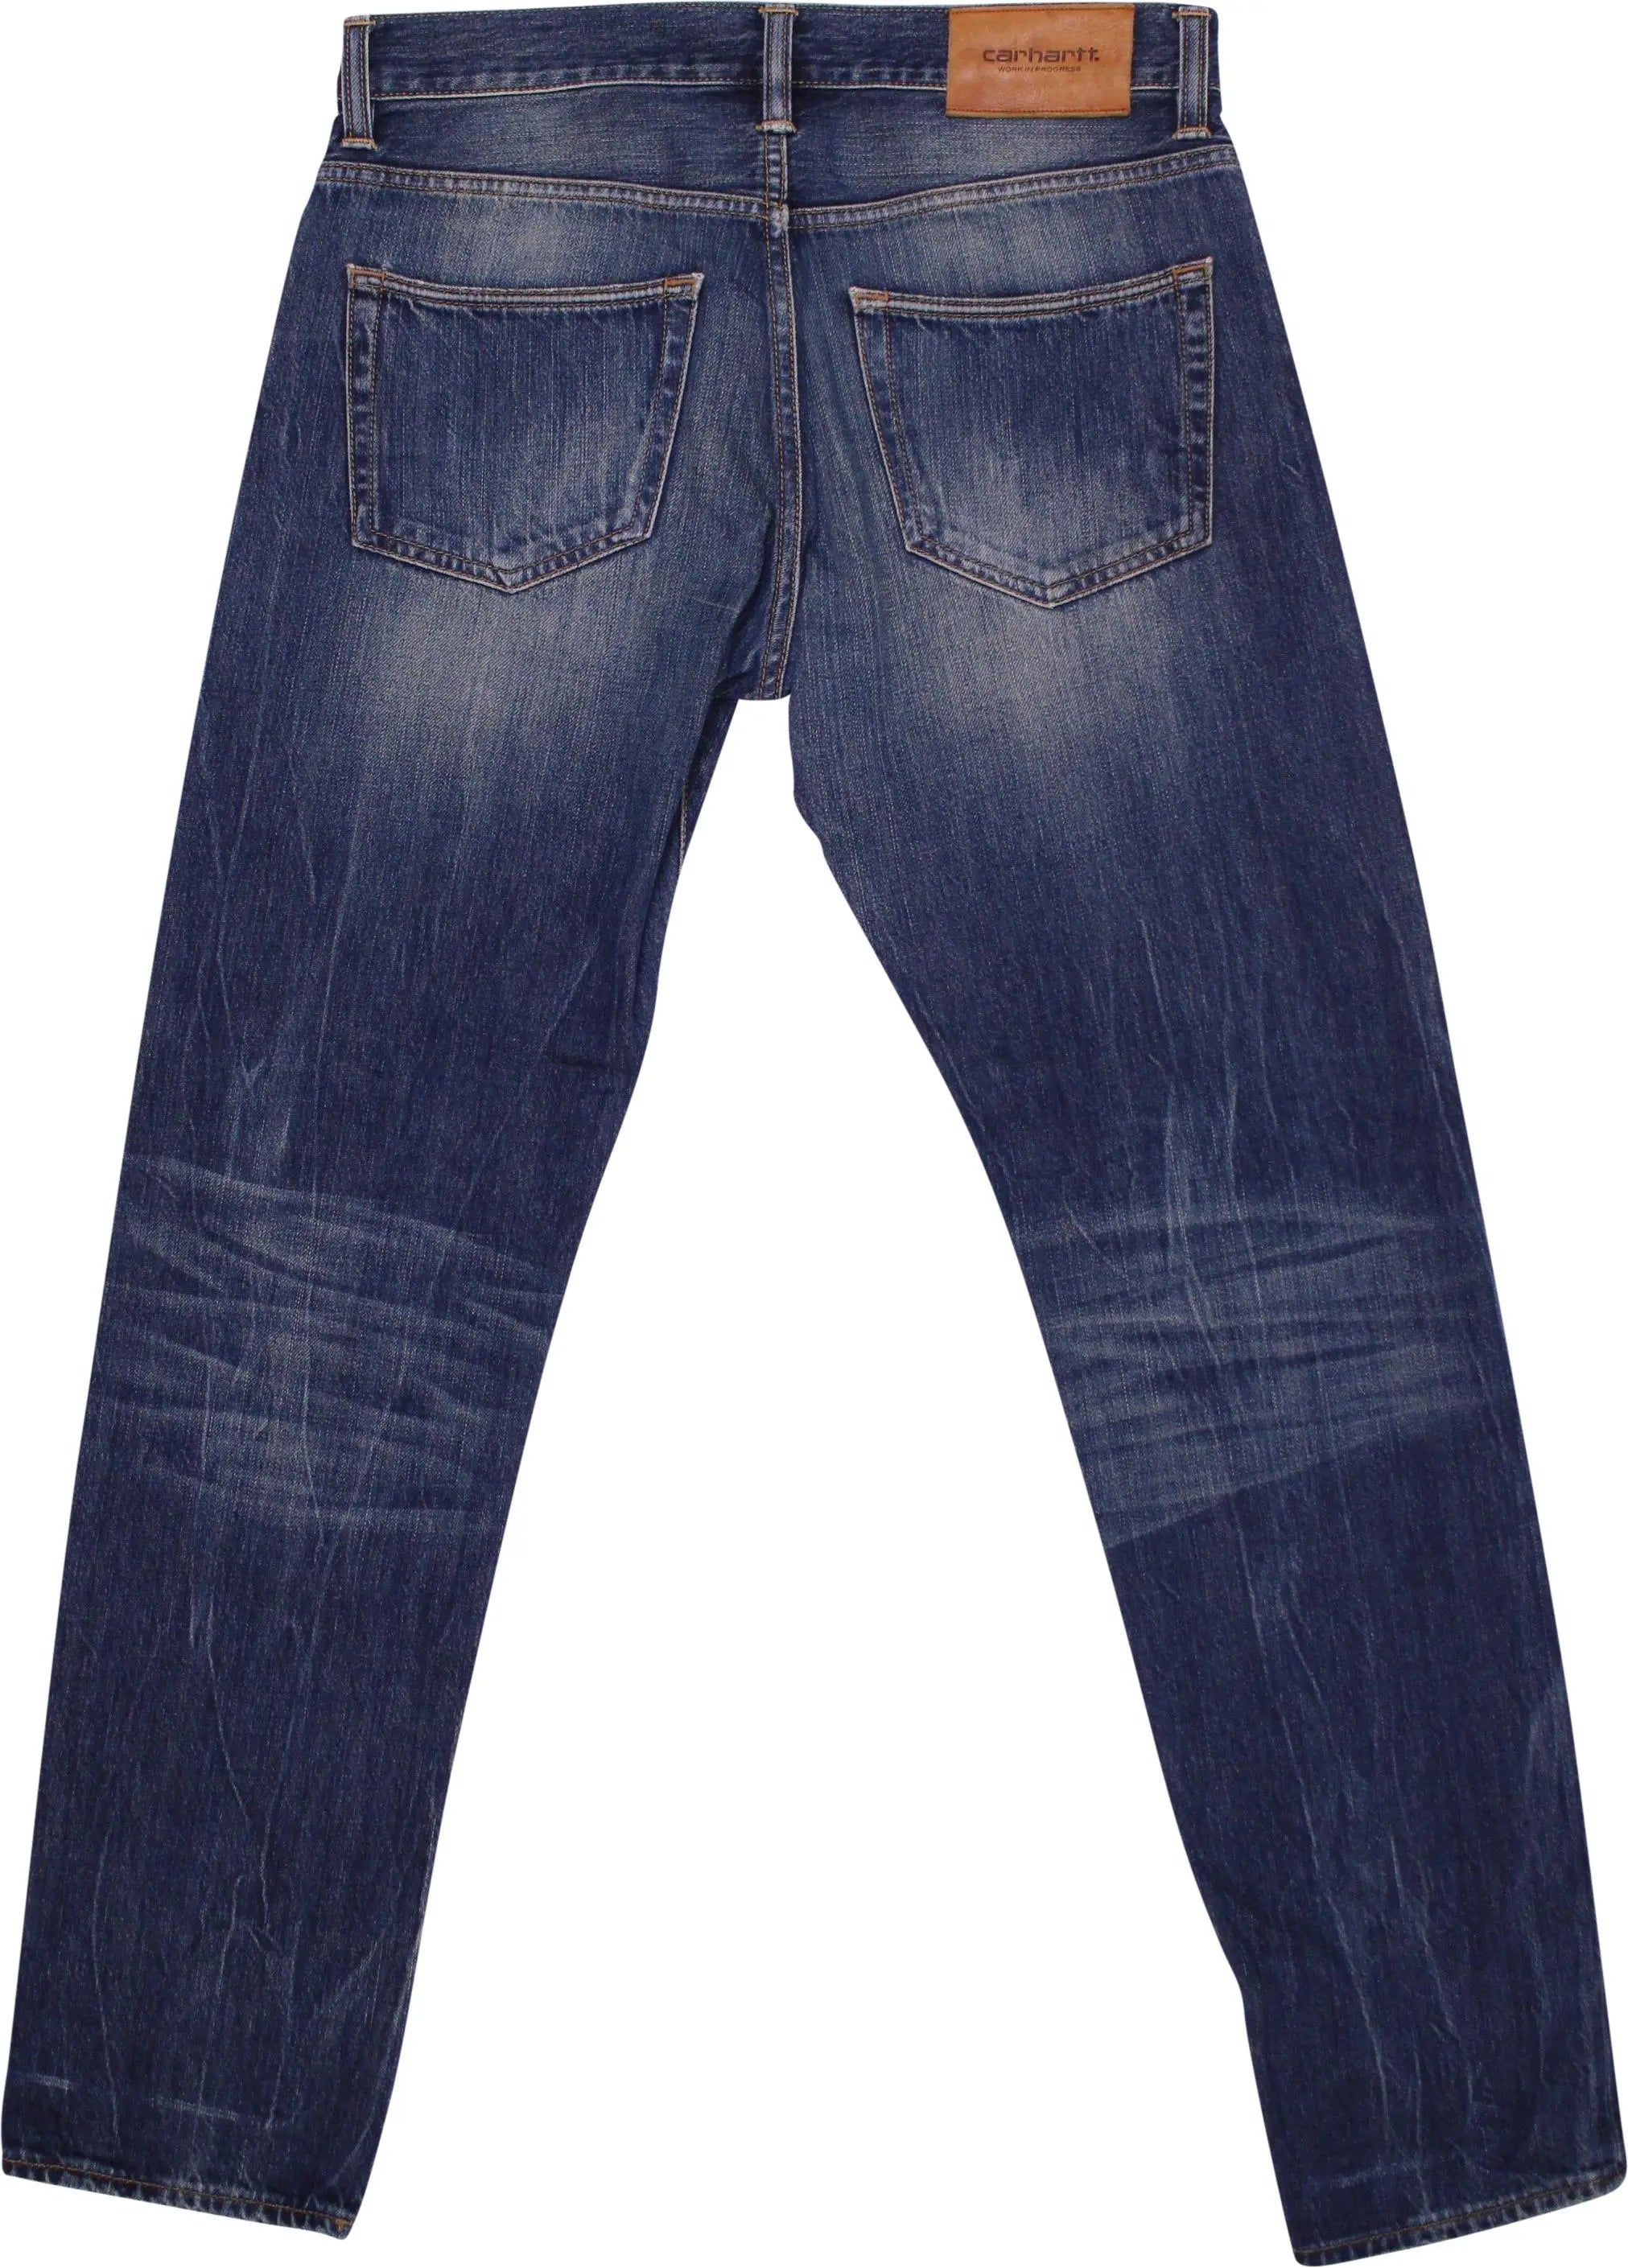 Carhartt - Blue Slim Fit Jeans by Carhartt- ThriftTale.com - Vintage and second handclothing